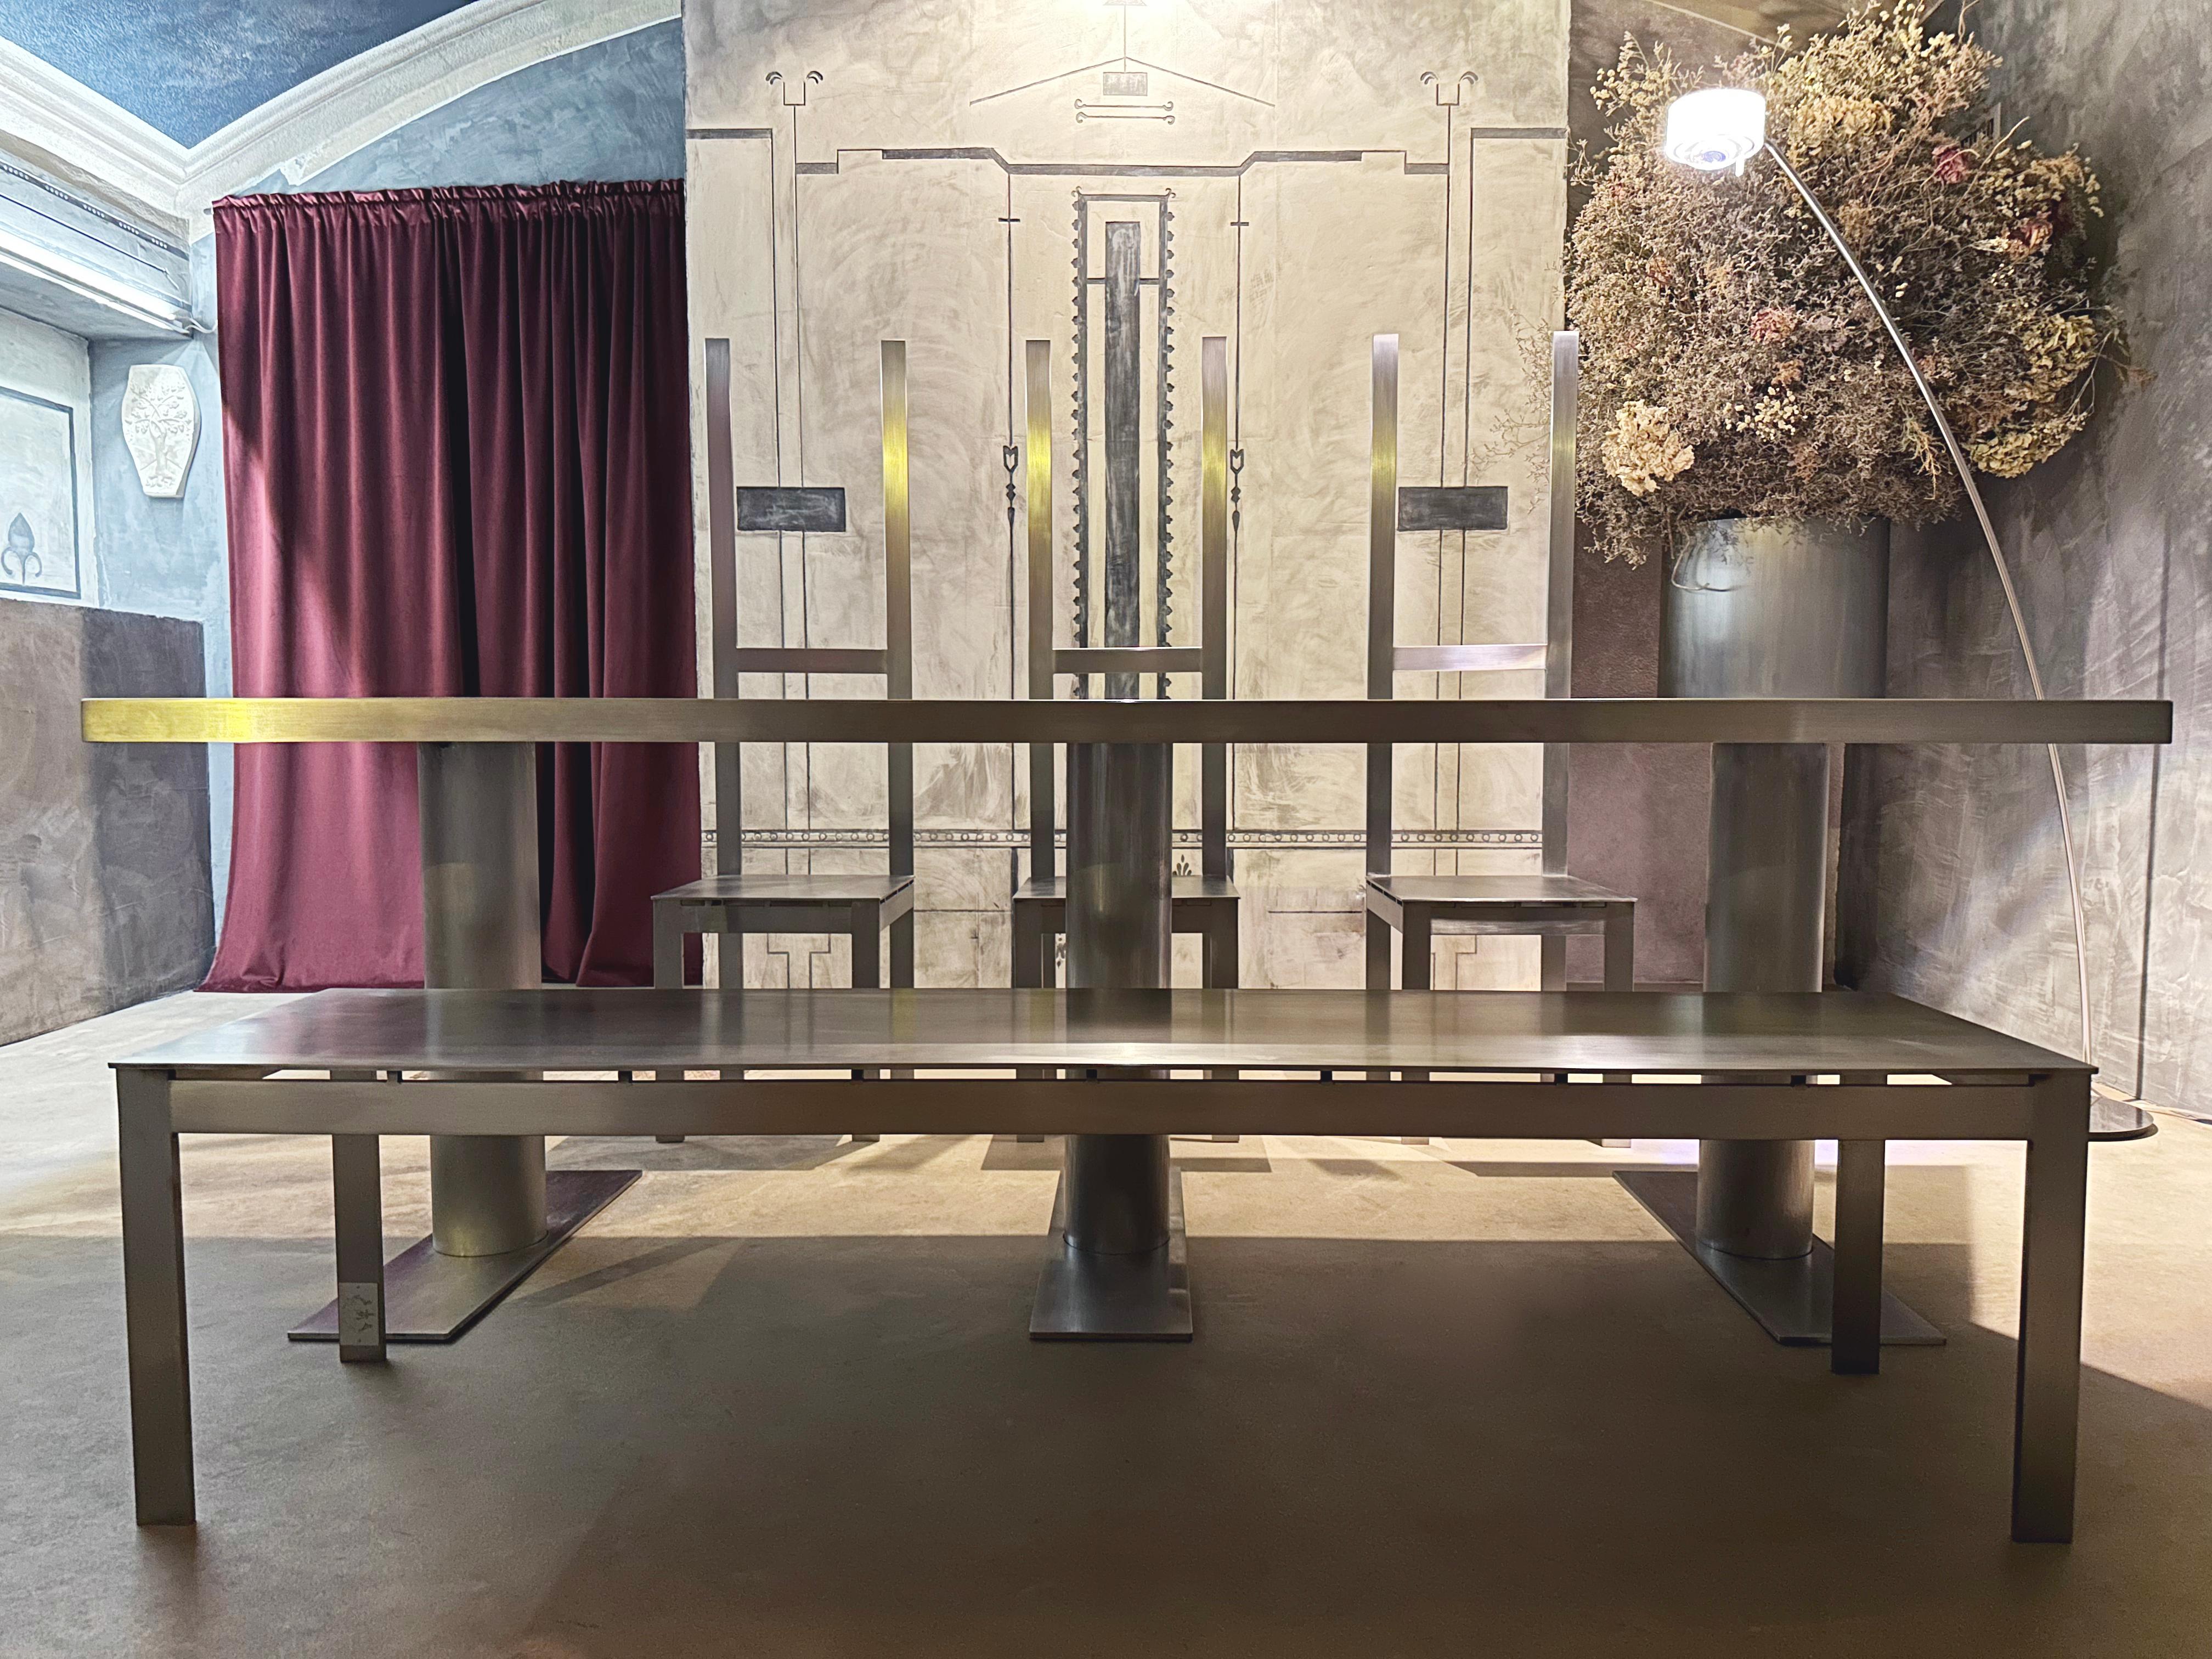 “Big Iron/Running Gun” Dining Room Set, Iron, JAMES VINCENT MILANO, Italy, 2023 

“Running Gun” Dining Table, Iron, JAMES VINCENT MILANO, Italy, 2023

Irregular hexagonal top. Tripod pedestal legs. 
Polished and brushed iron.
Handcrafted in Cantù,